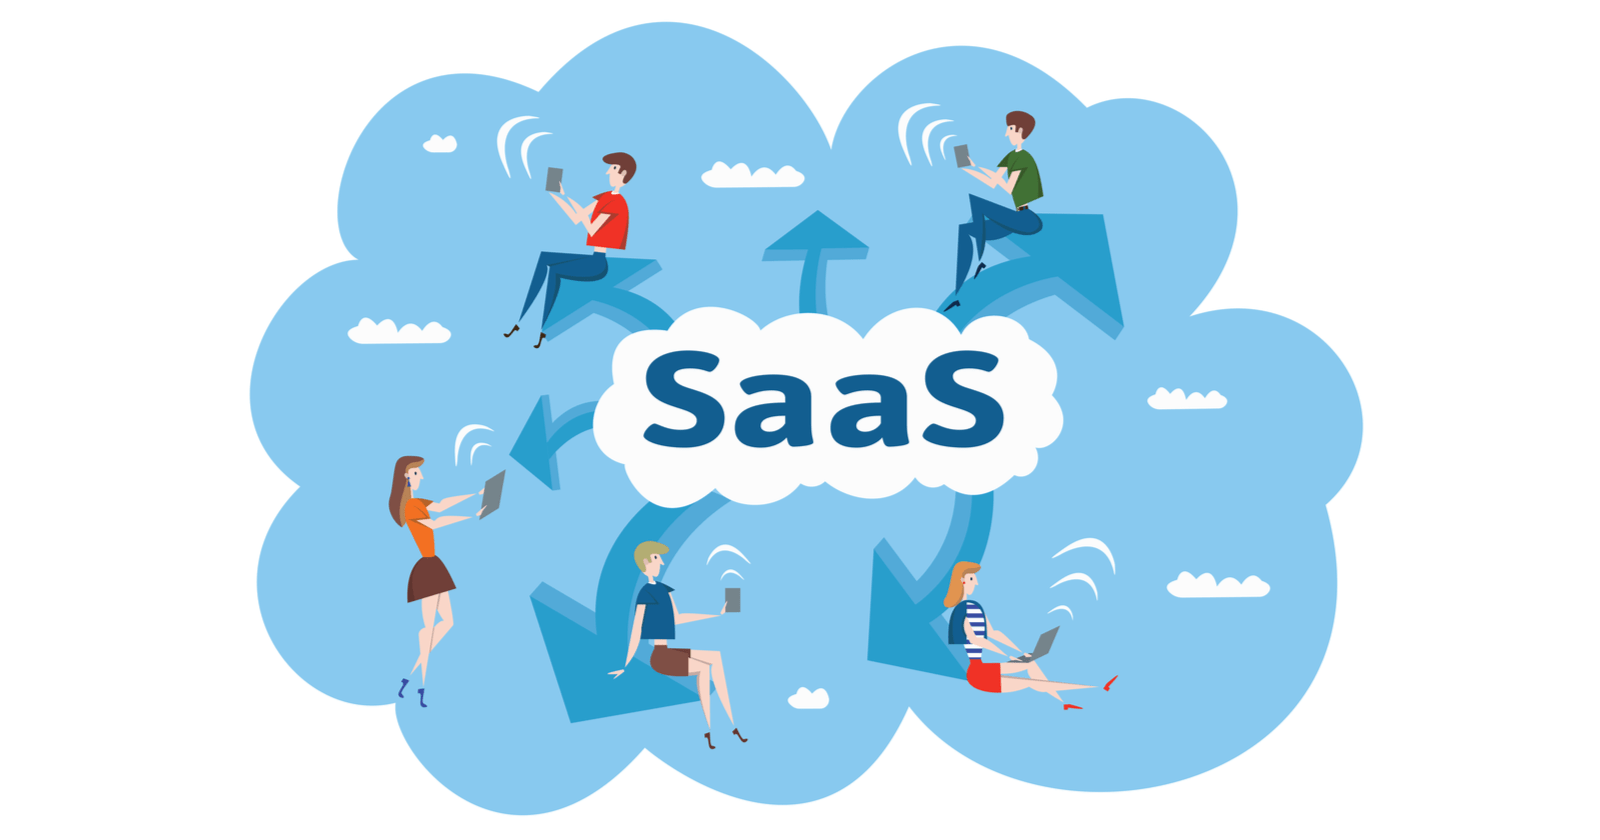 How to Build a SaaS Product Step by Step Guide?